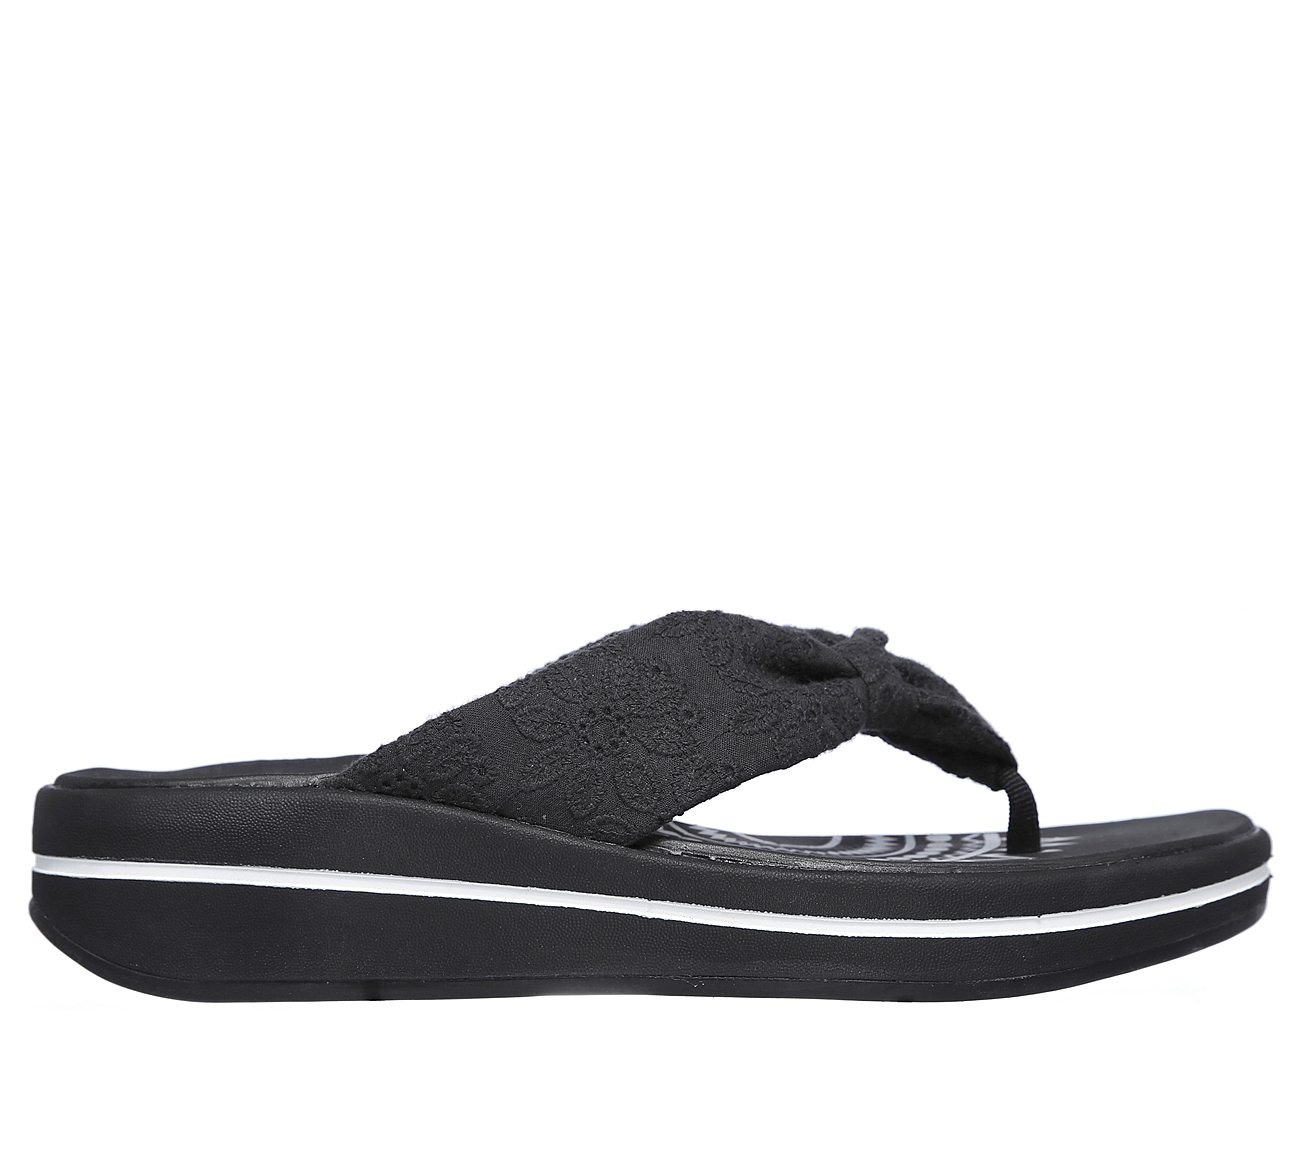 skechers relaxed fit thong sandals